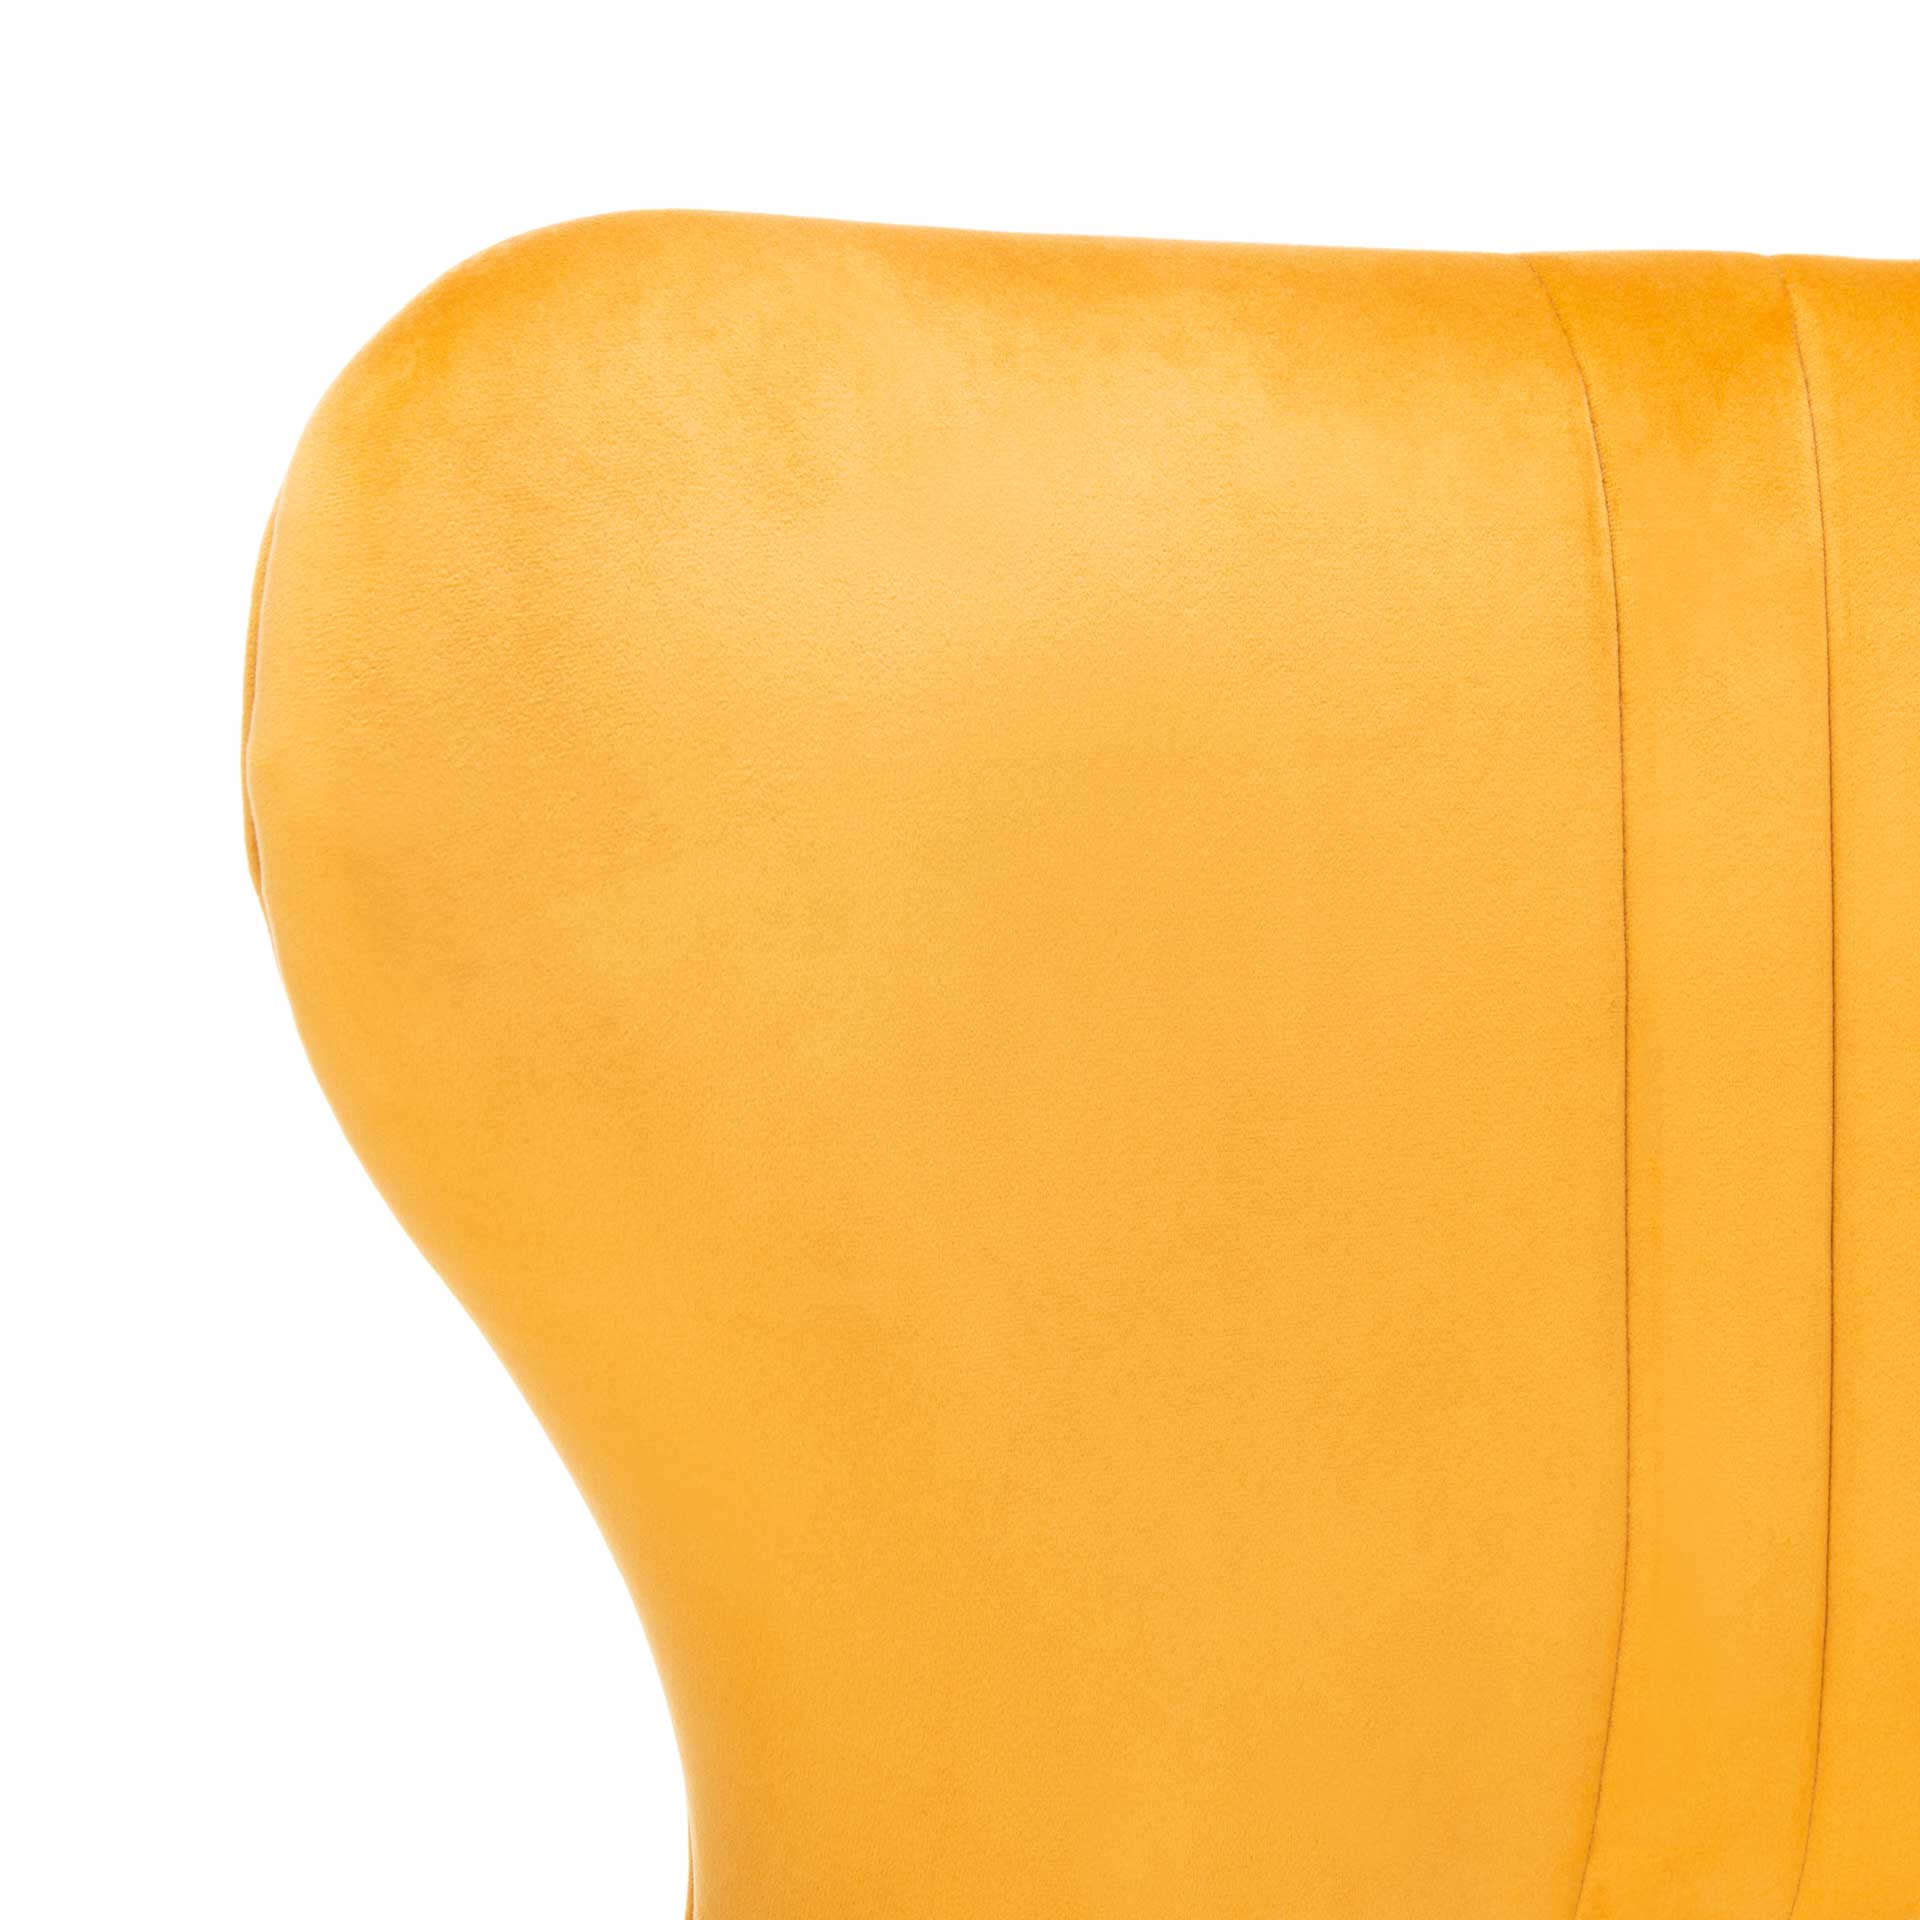 Blake Wingback Accent Chair Marigold